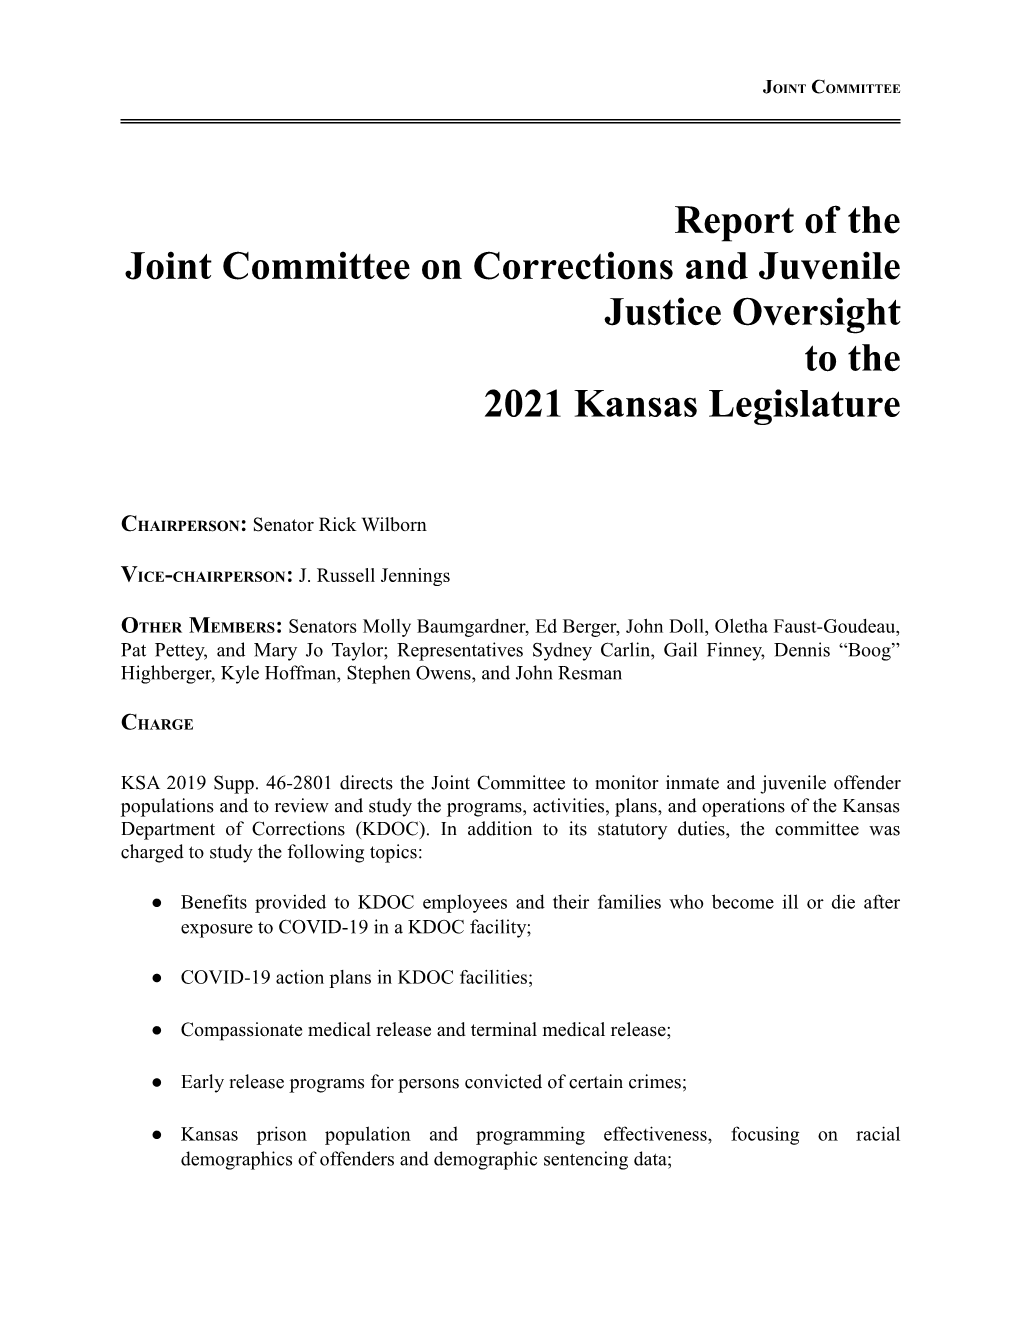 Committee on Corrections and Juvenile Justice Oversight to the 2021 Kansas Legislature